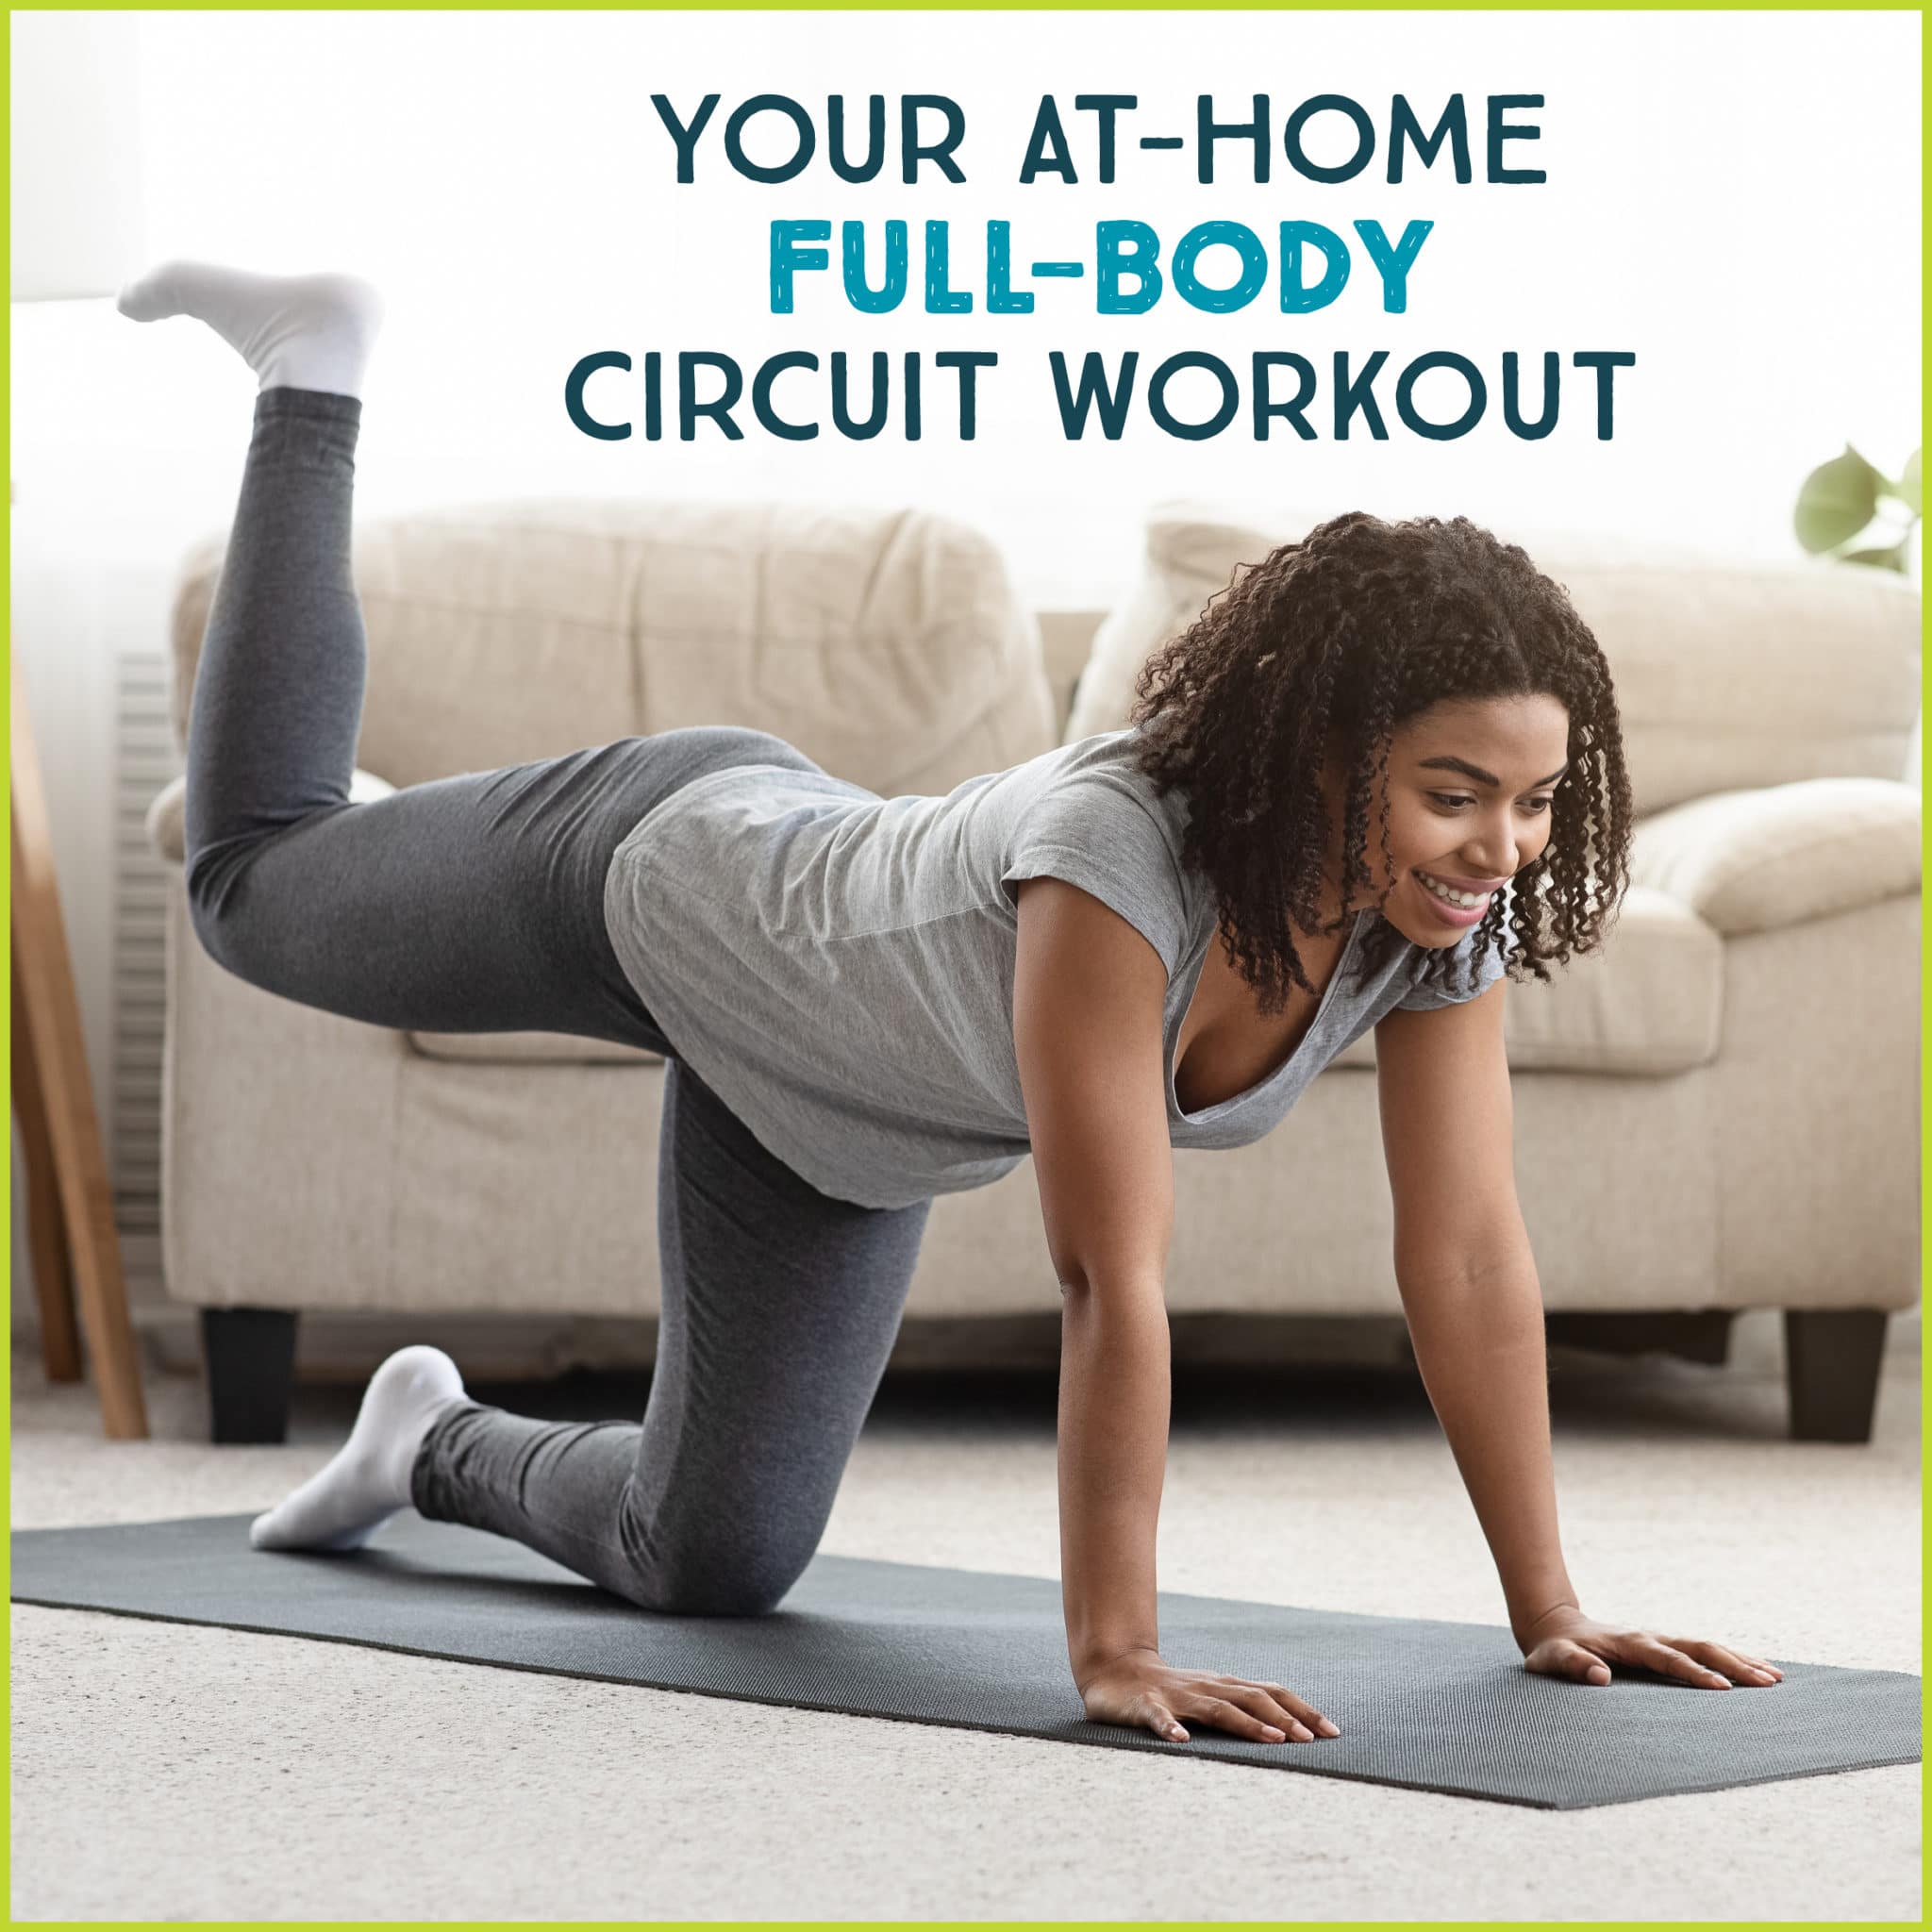 Your At-Home Full-Body Circuit Workout (With Video)